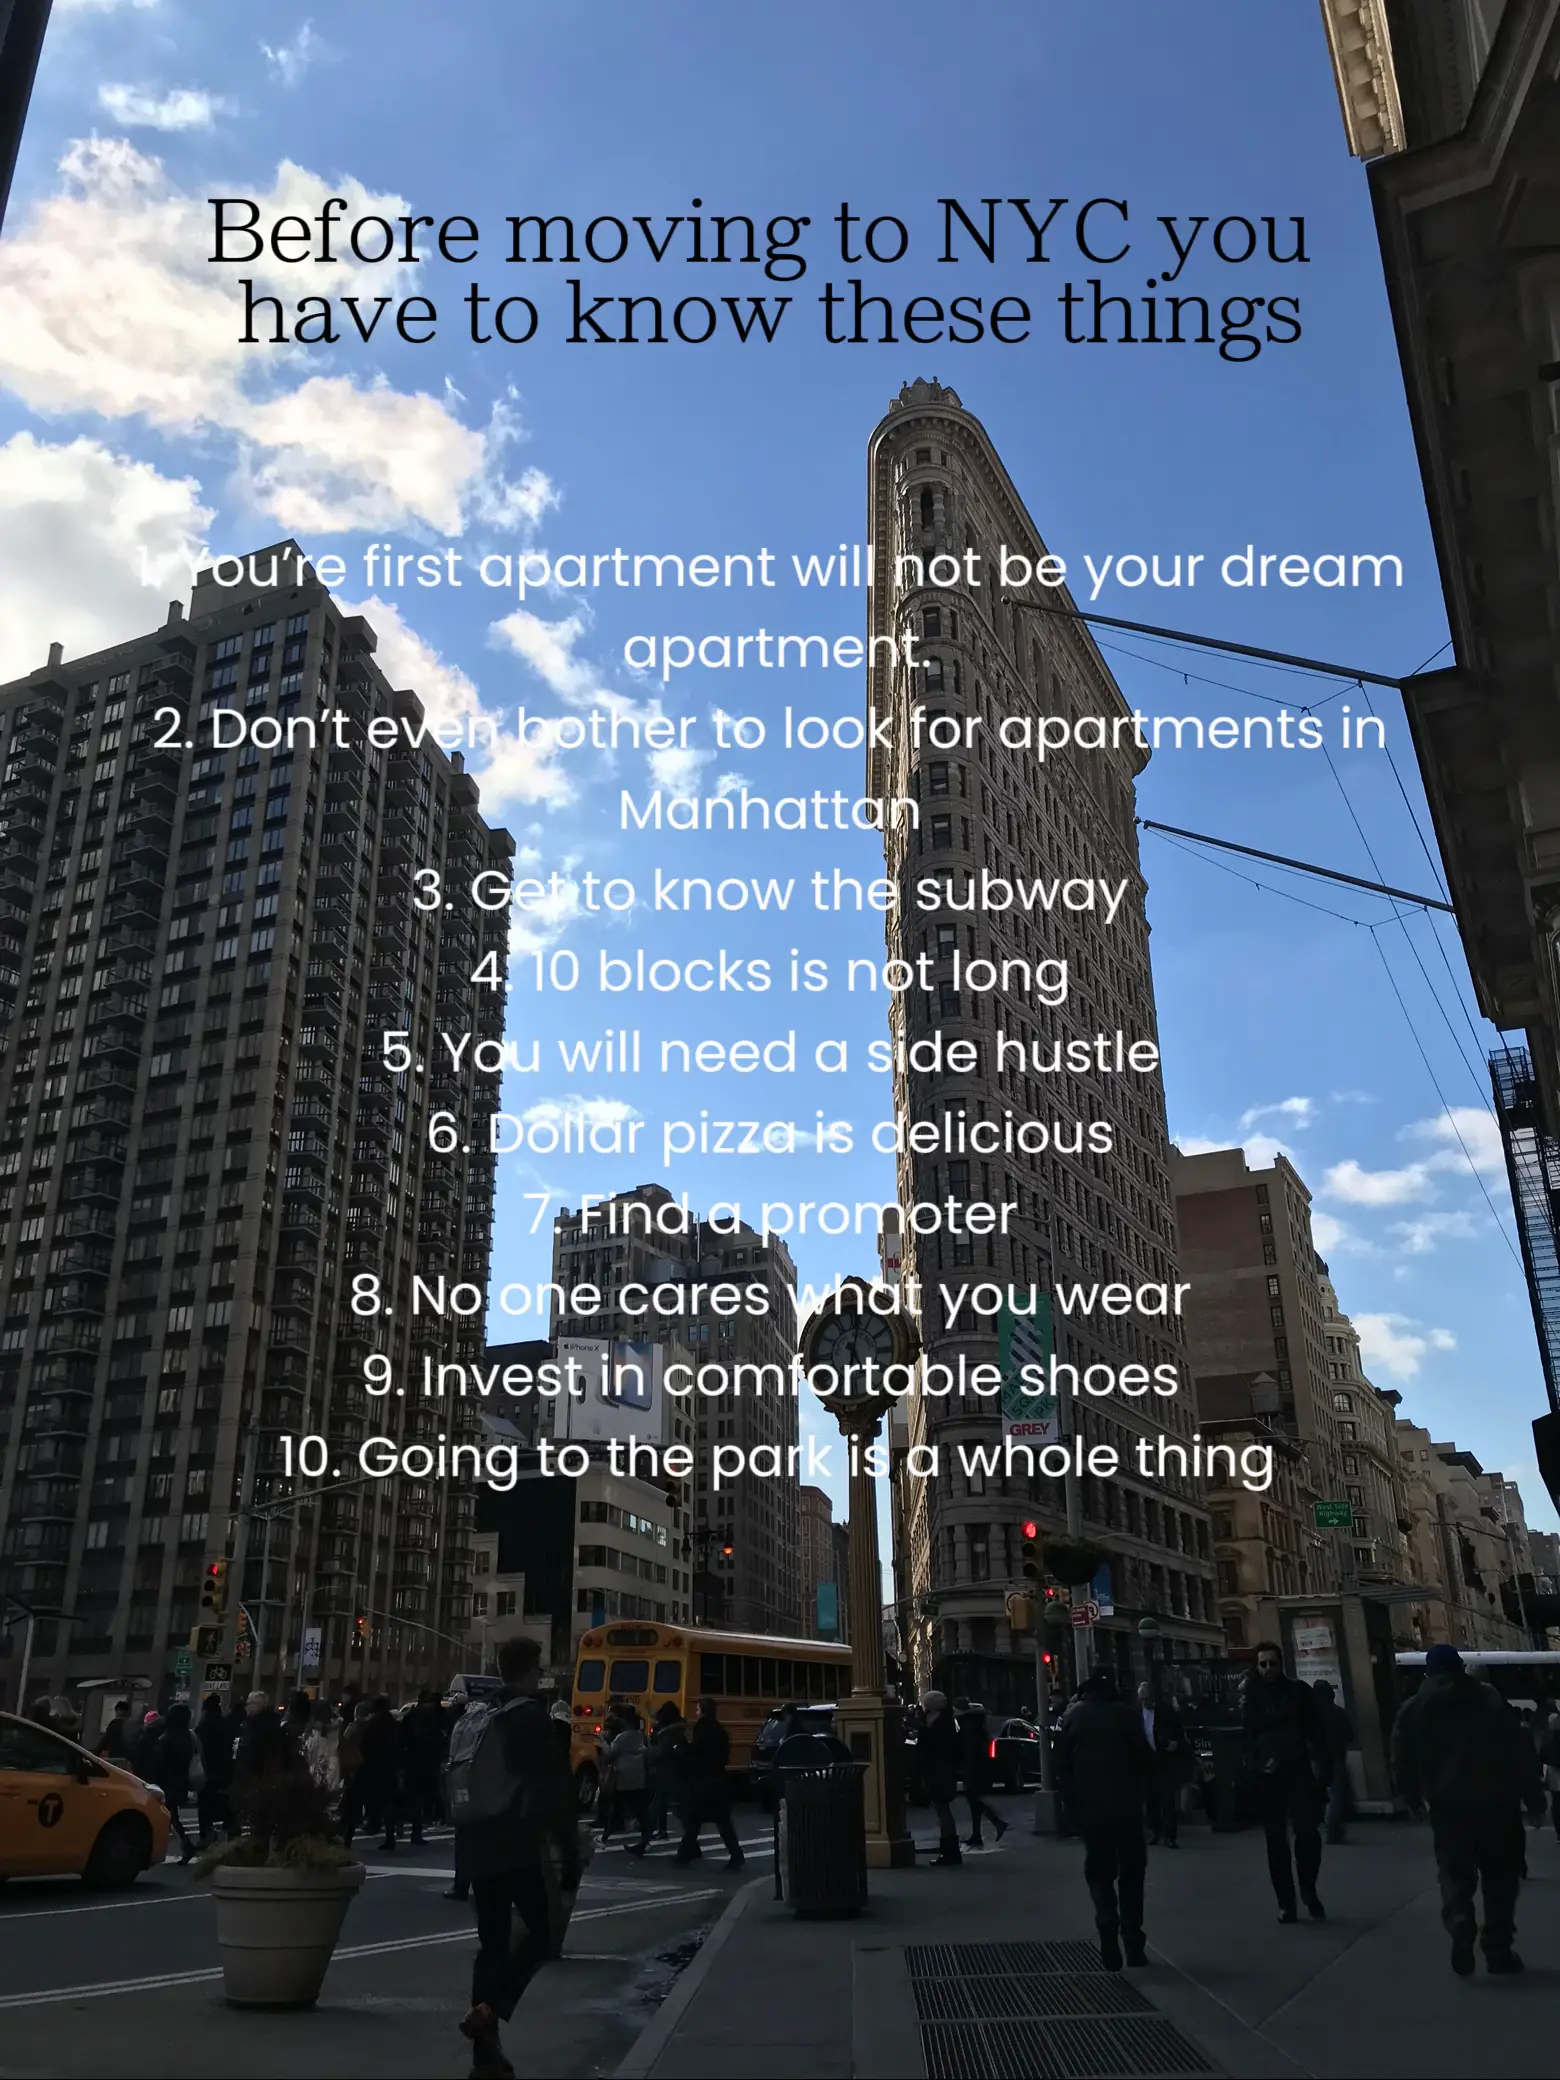  A list of things to know before moving to New York City.